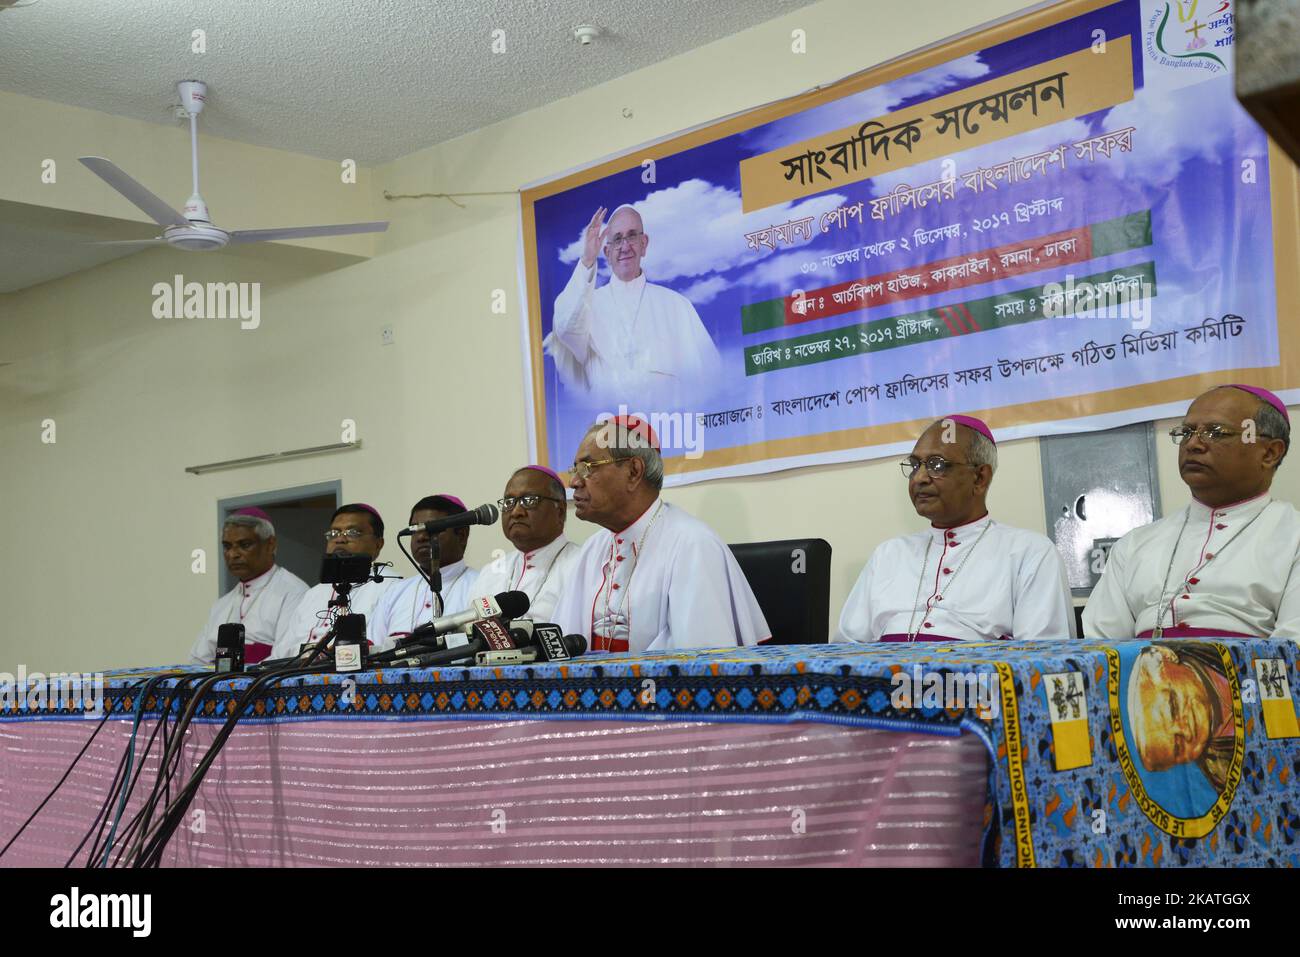 Pope Francis will visit Dhaka from November 30 to December 2, which comes after his visit to Myanmar, Cardinal Patrick D' Rozario (C) says at a press conference at Ramna Cathedral on Monday, November 27, 2017.'They are praying and preparing to join a mass [prayer service] at the Suhrawardy Udyan on December 1,' Cardinal Patrick D' Rozario said.Around 80,000 Christians are expected to attend the service, Cardinal added. On November 30, Pope would visit the National Martyrs' Monument in Savar, Bangabandhu Memorial Museum in Dhanmondi, meet the president, officials, diplomats and civil society me Stock Photo